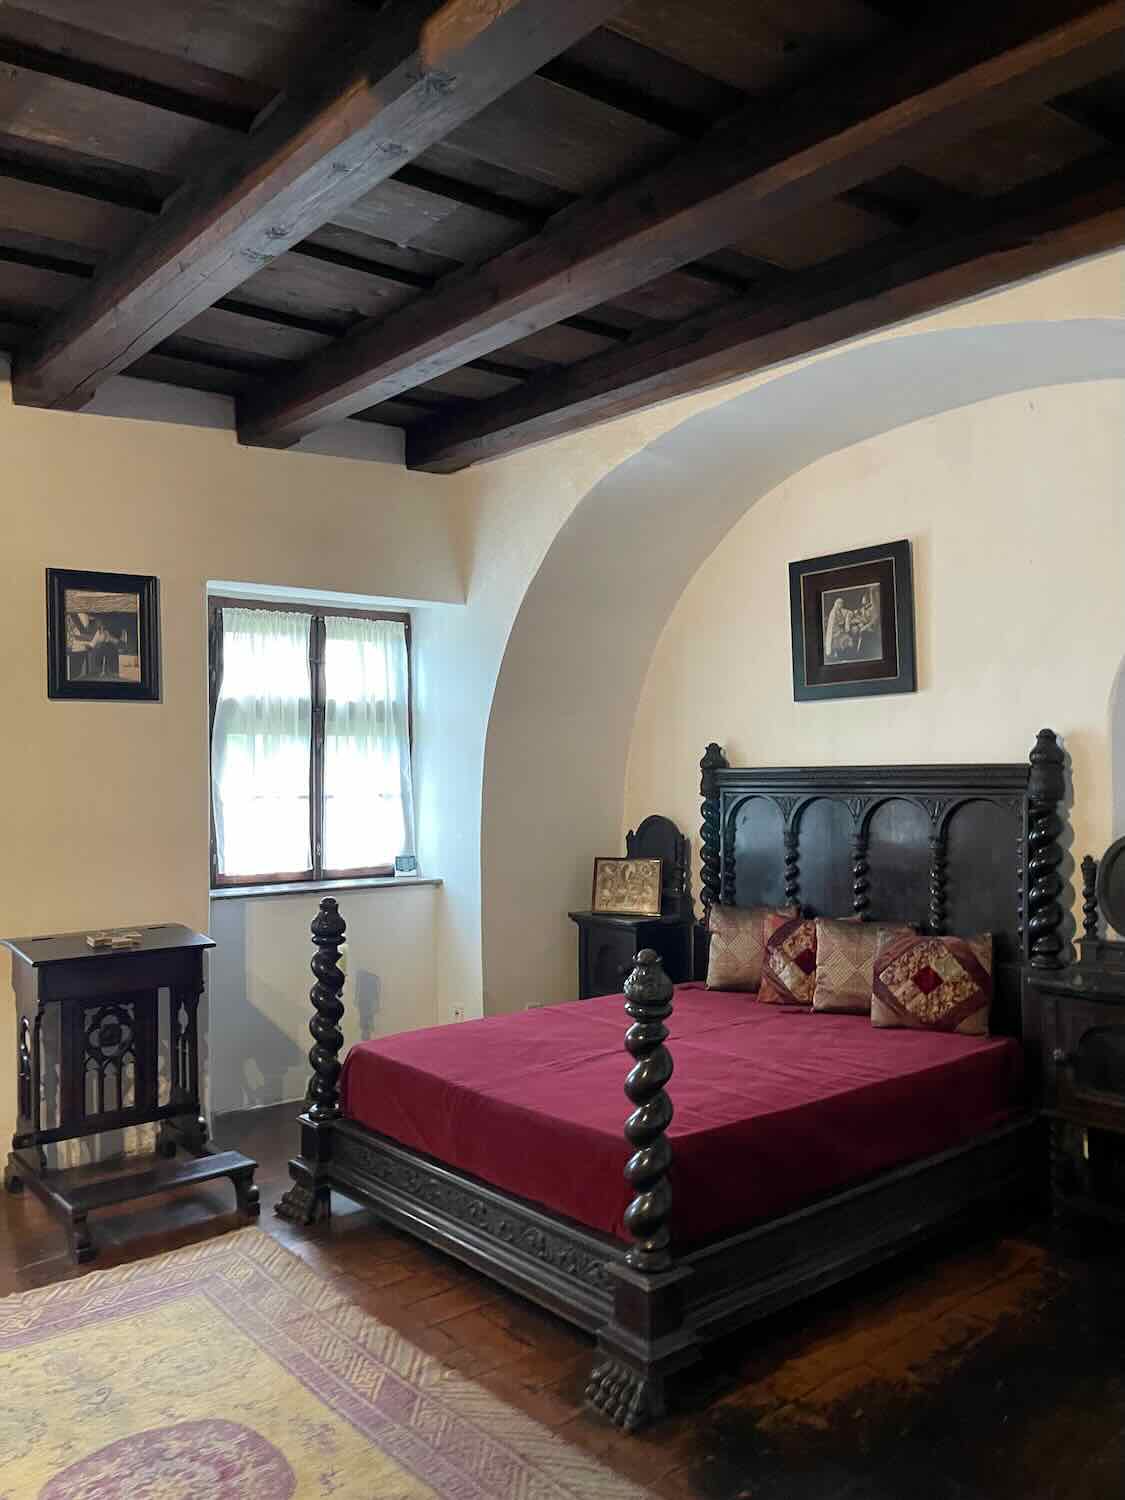 A grand, antique wooden bed with spiral bedposts and a red duvet in a room with exposed wooden ceiling beams, an archway, and traditional furnishings, suggesting a historical setting.